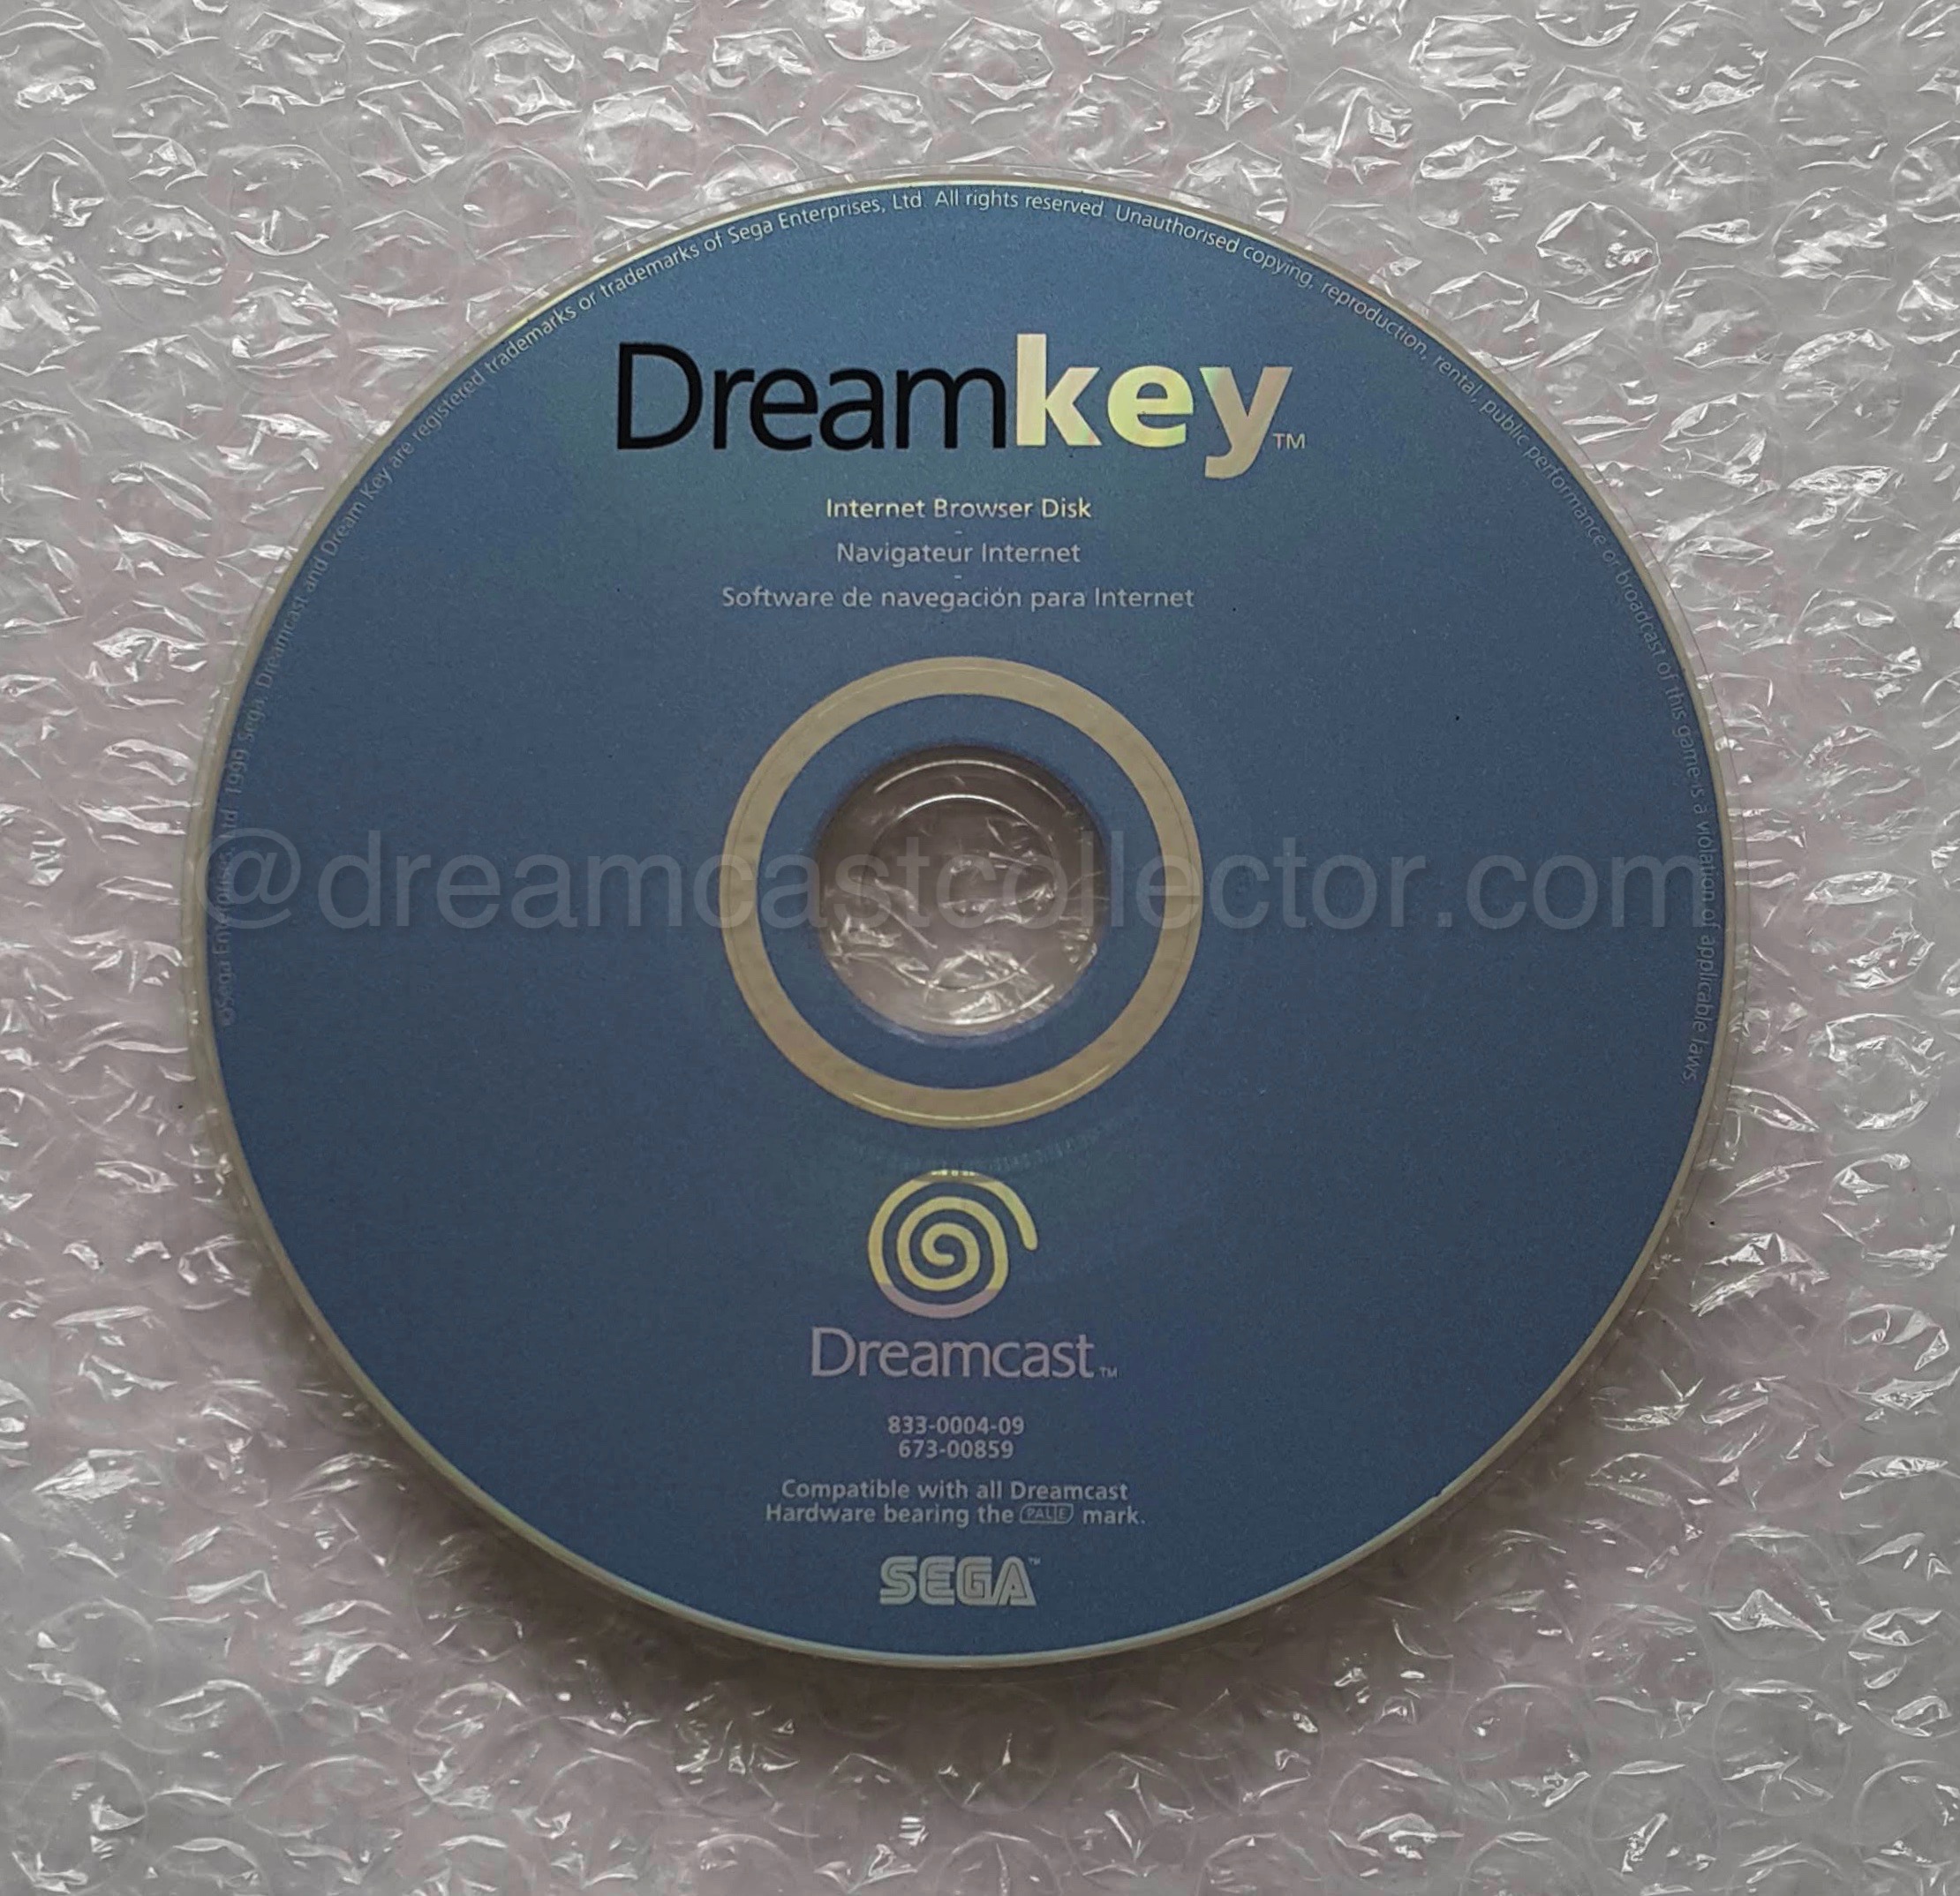 The French Dreamkey's disc label differentiates itself from the more common 610-7373 European iteration. It employs the same metallic blue colour found on its front & back inserts on the face of the disc rather than the white of the earlier generic version of the software.